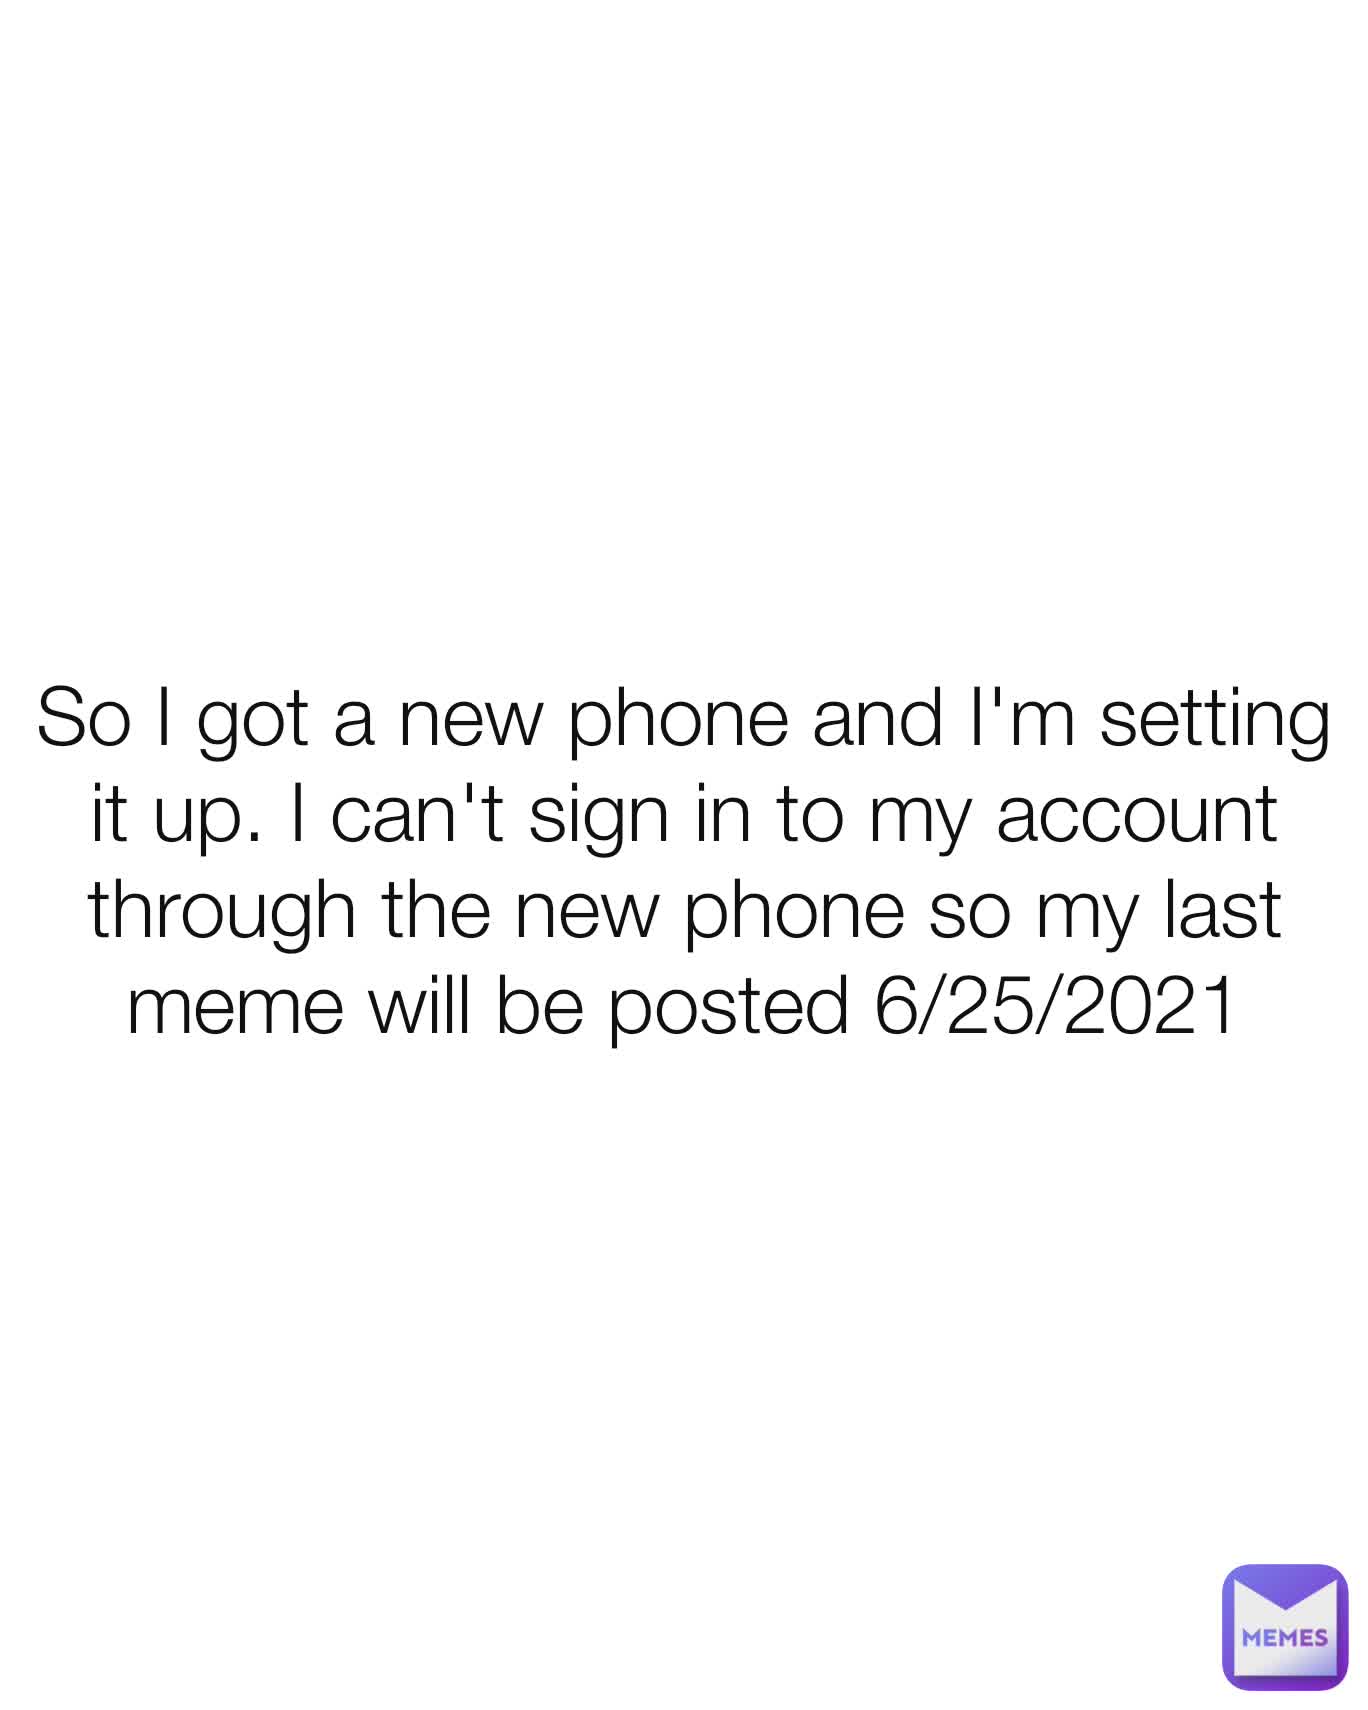 So I got a new phone and I'm setting it up. I can't sign in to my account through the new phone so my last meme will be posted 6/25/2021